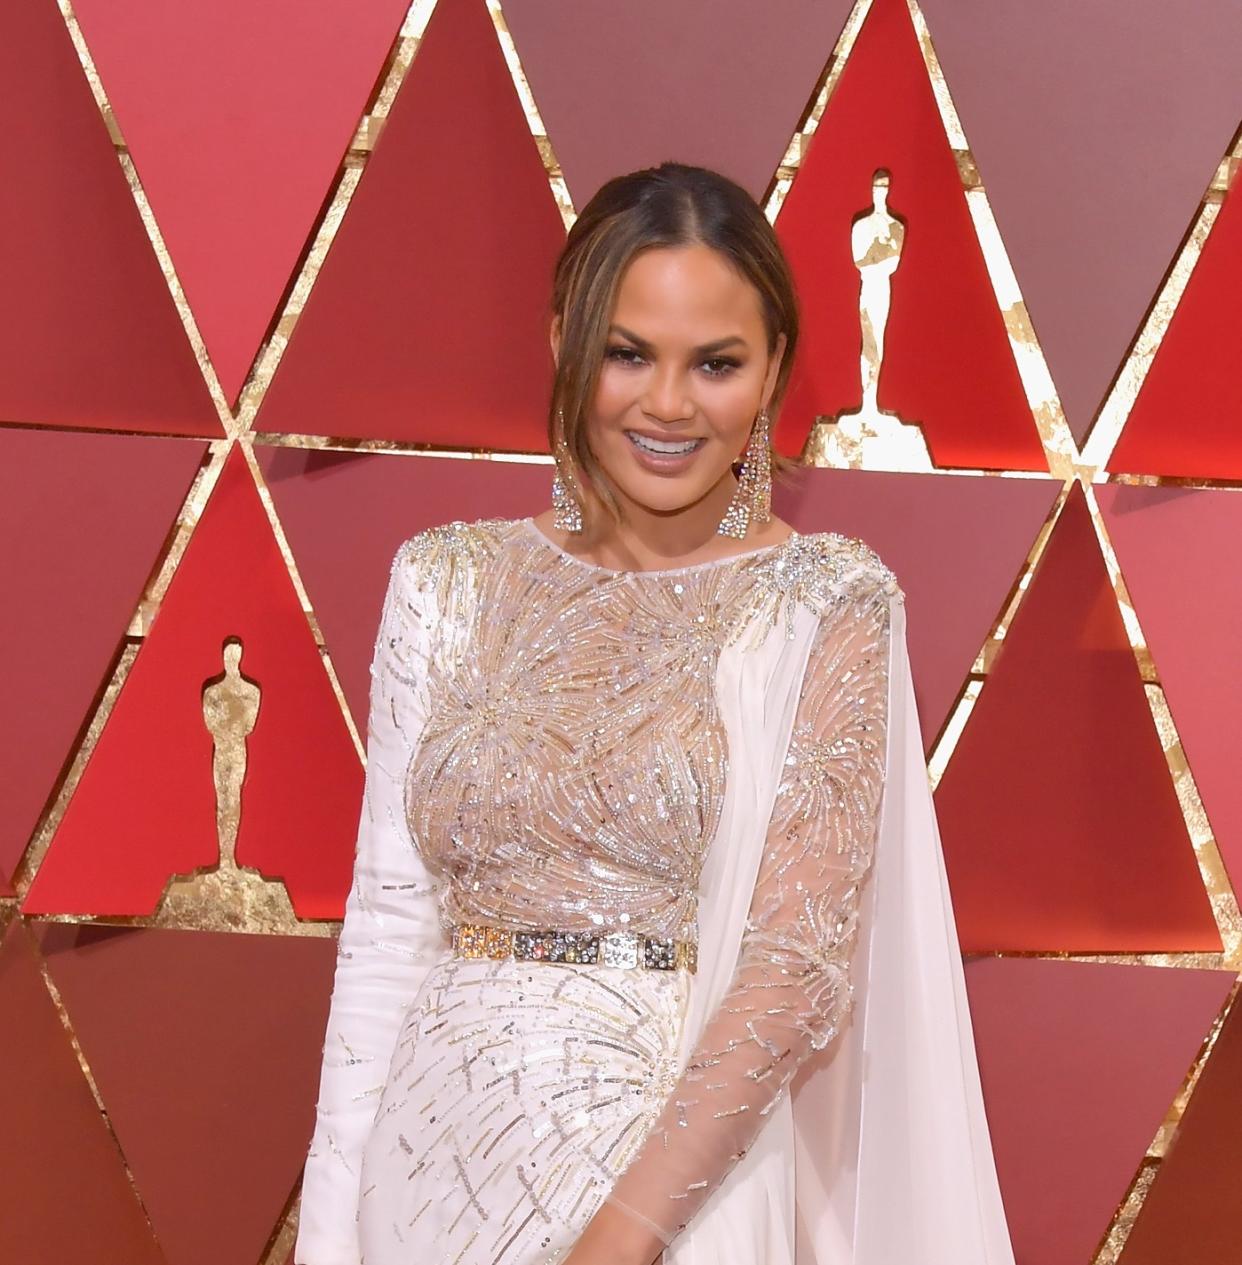 Everyone at the Oscars looks like they are wearing wedding dresses, and we are very into it